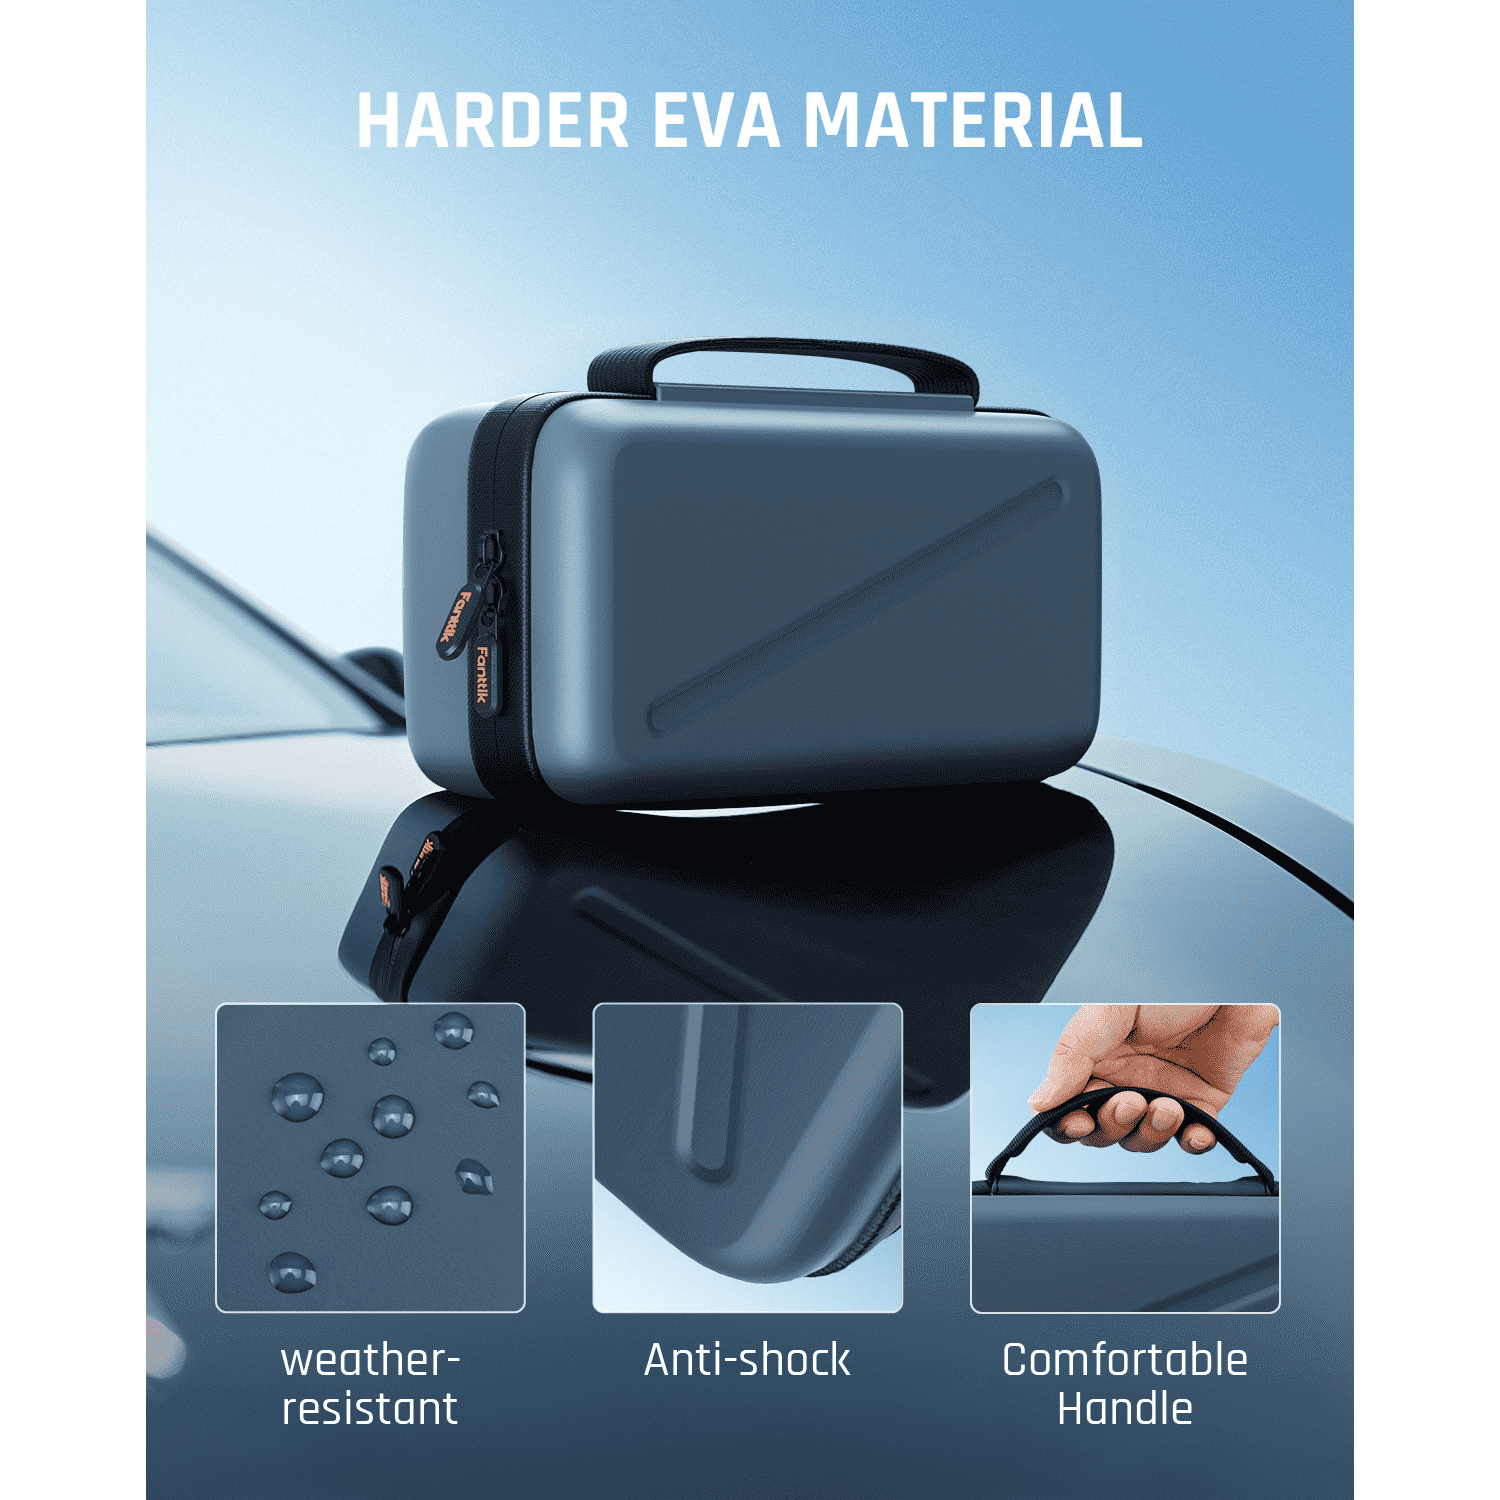 This portable carrying bag features hard and water-resistant EVA material with durable lifetime, and can perfectly protect your X8 APEX tire inflator from shocks, bumps, dents and scratches.